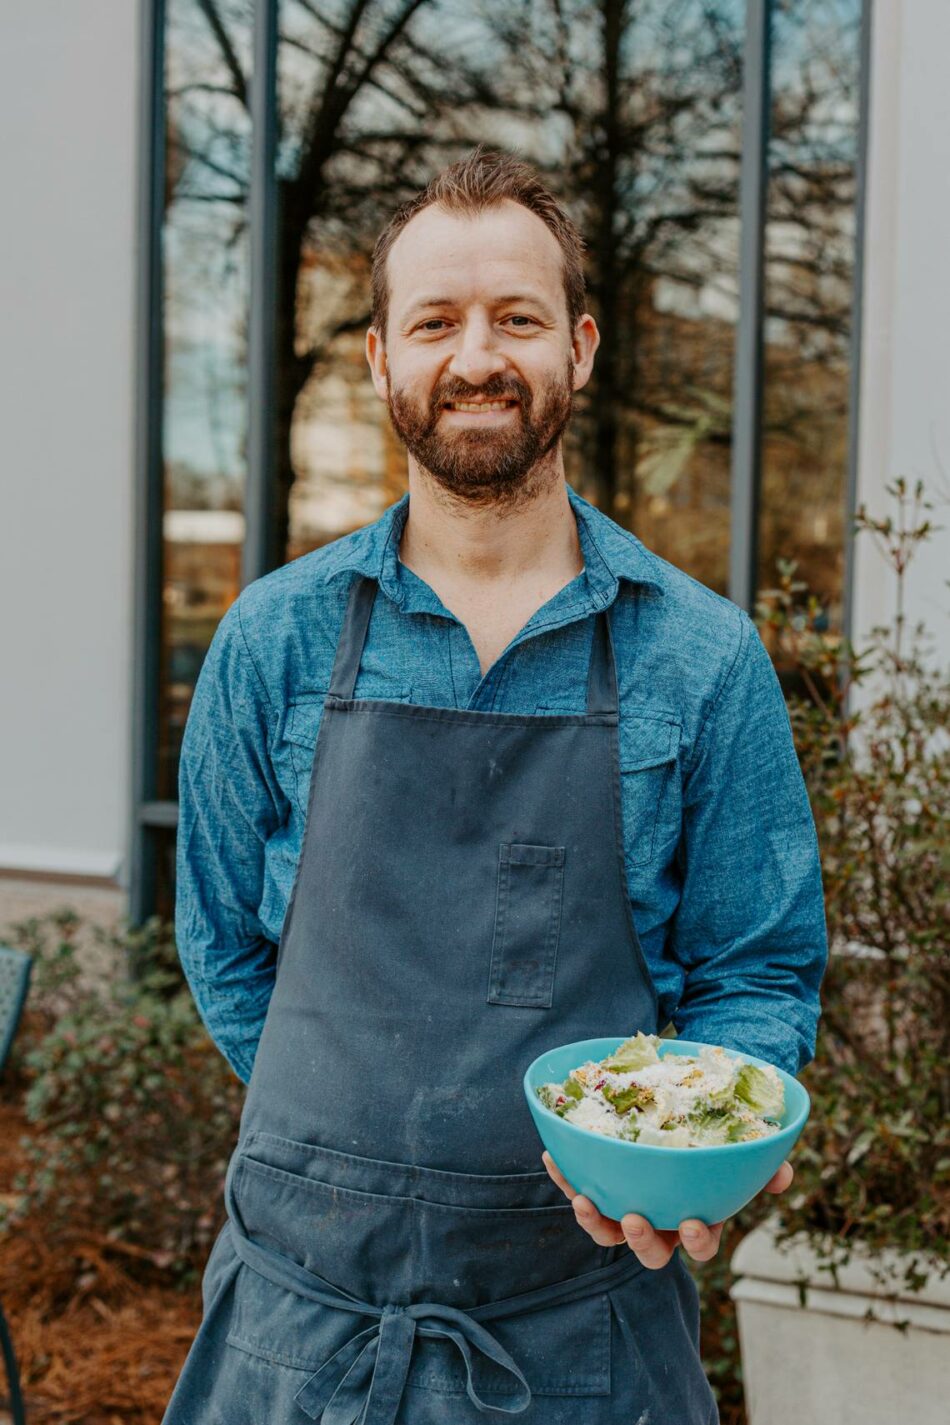 A popular Chapel Hill chef faces off against Bobby Flay on the Food Network